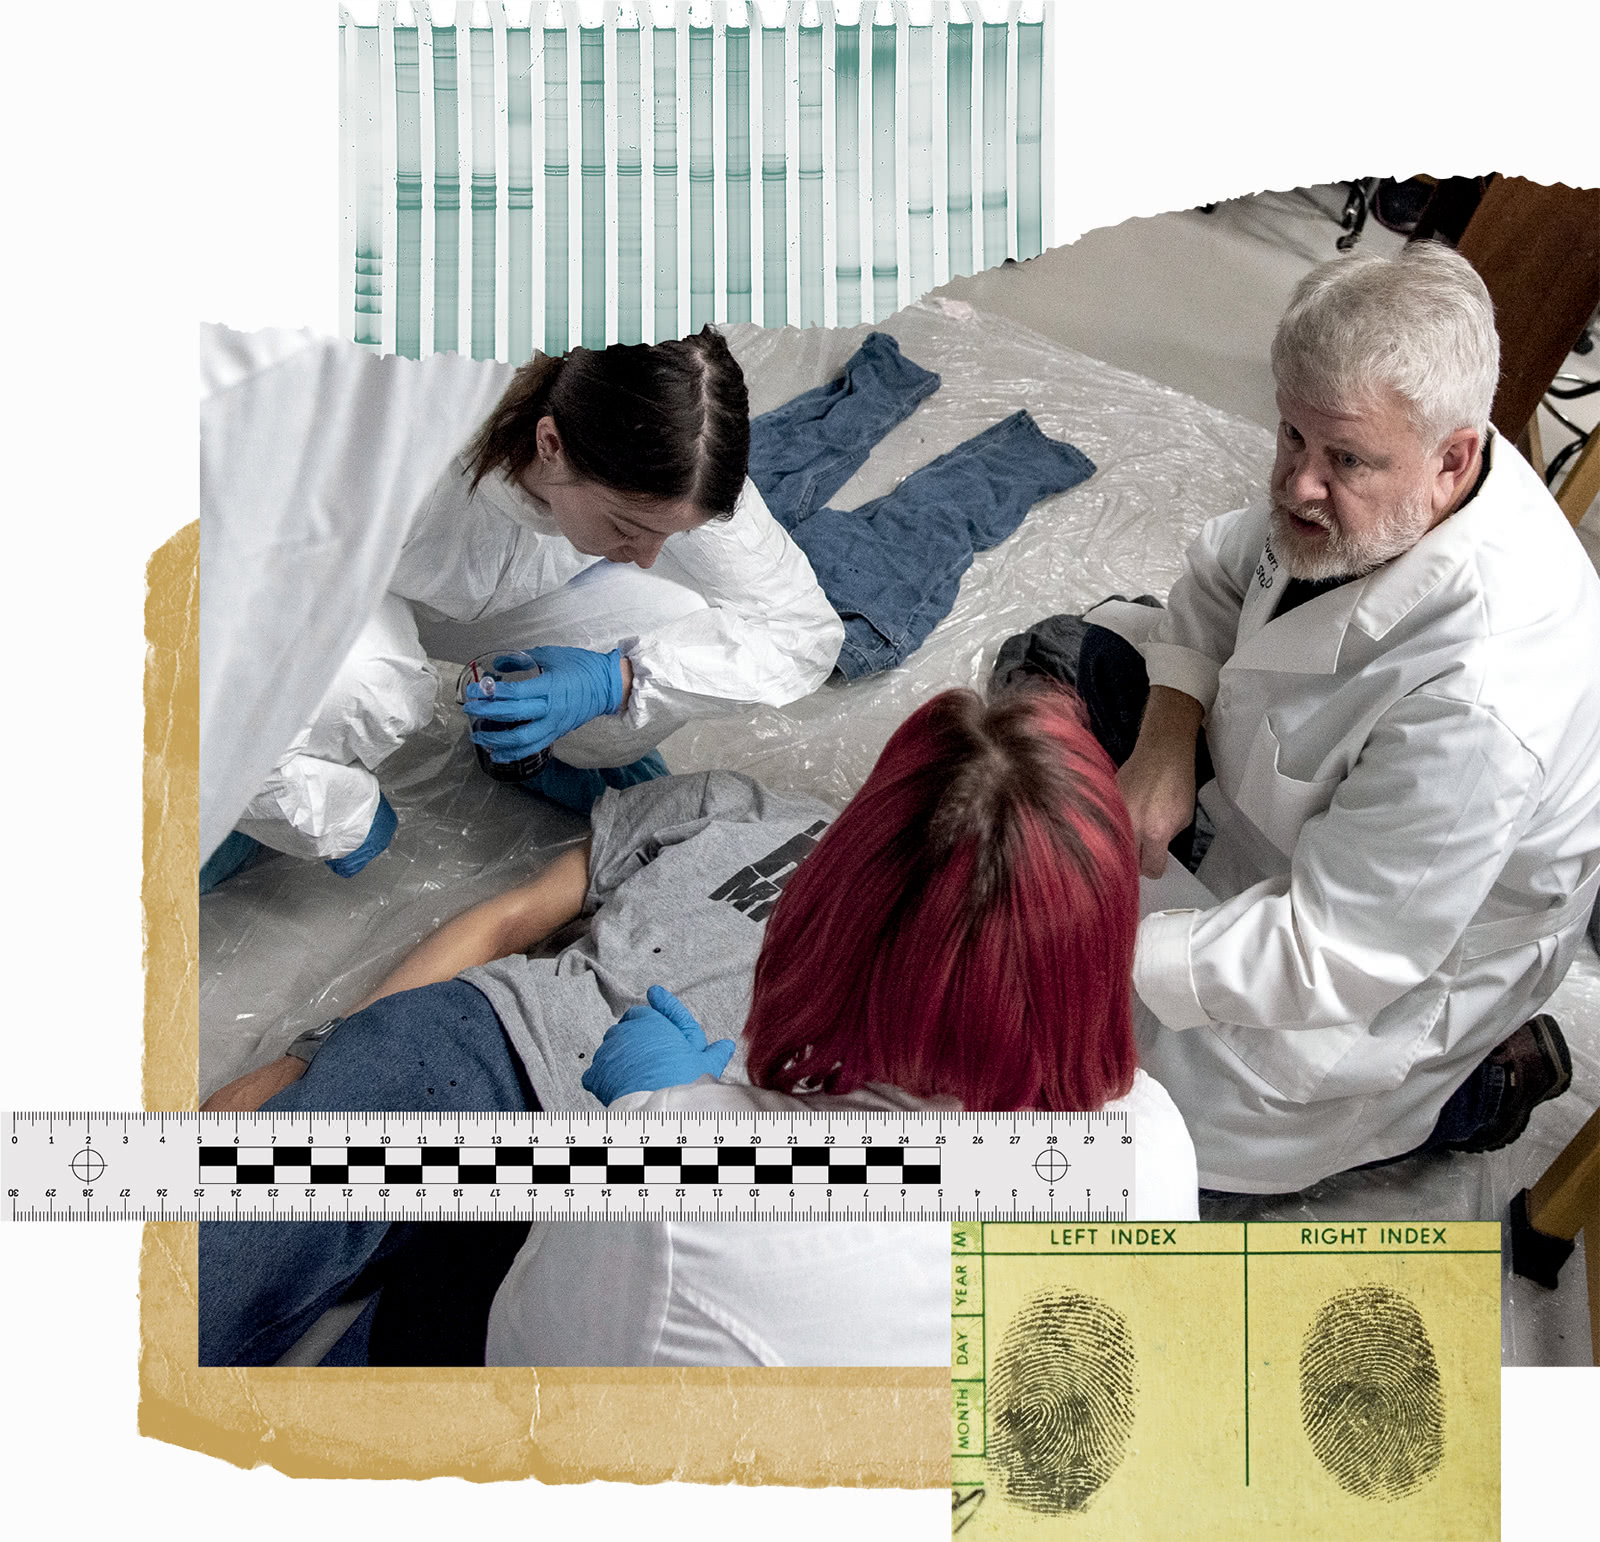 David Rivers and his students kneel on the ground examining a fake cadaver